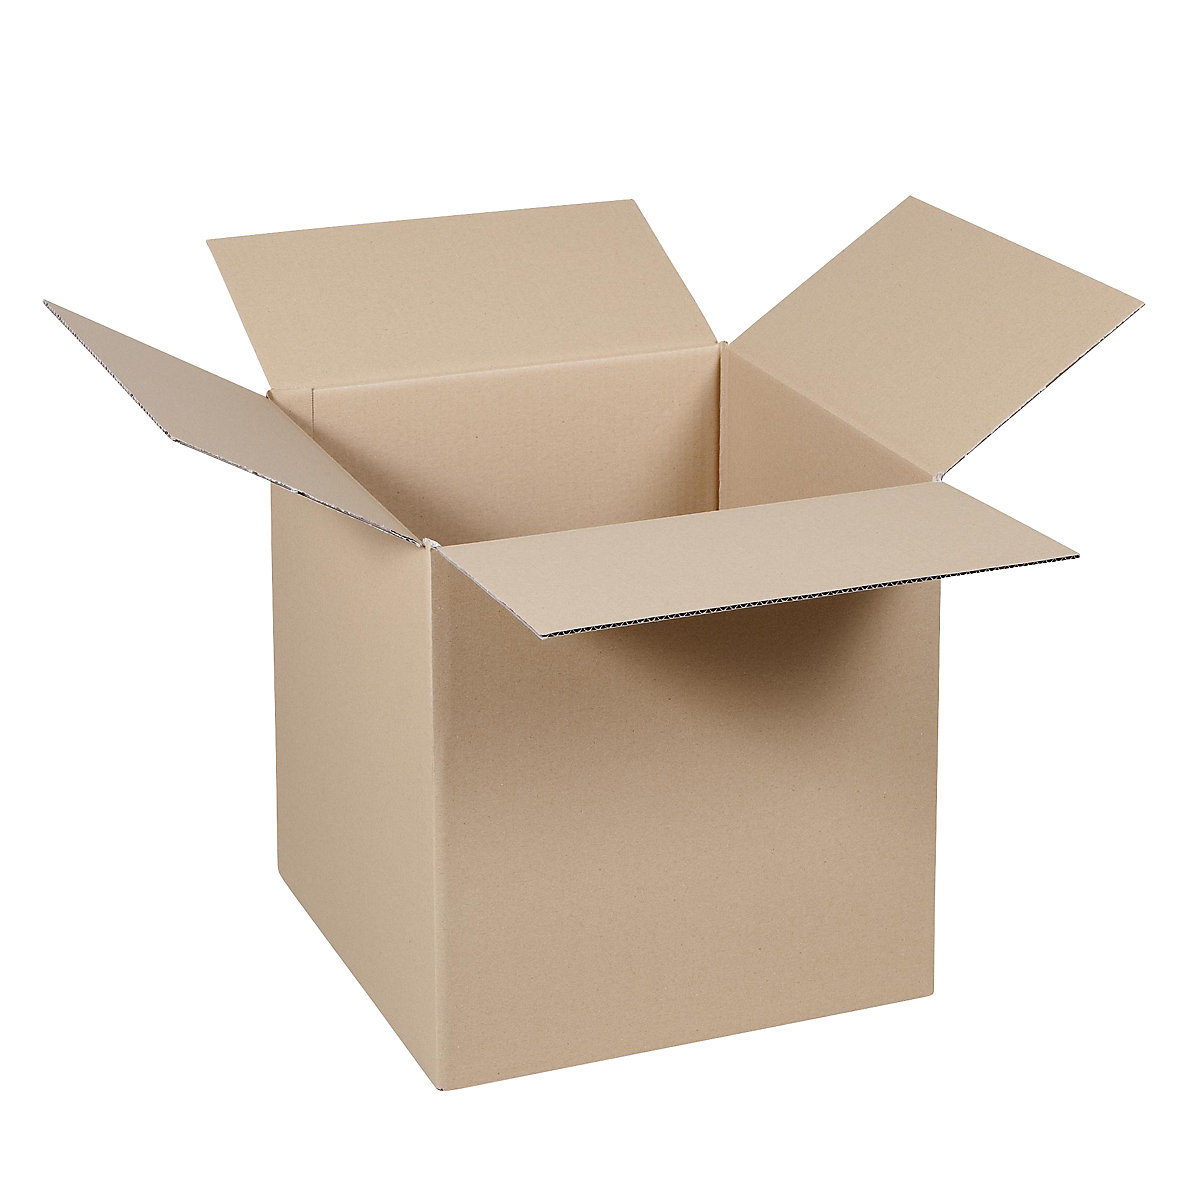 Folding cardboard box, FEFCO 0201, made of double fluted cardboard, internal dimensions 450 x 450 x 450 mm, pack of 100-11